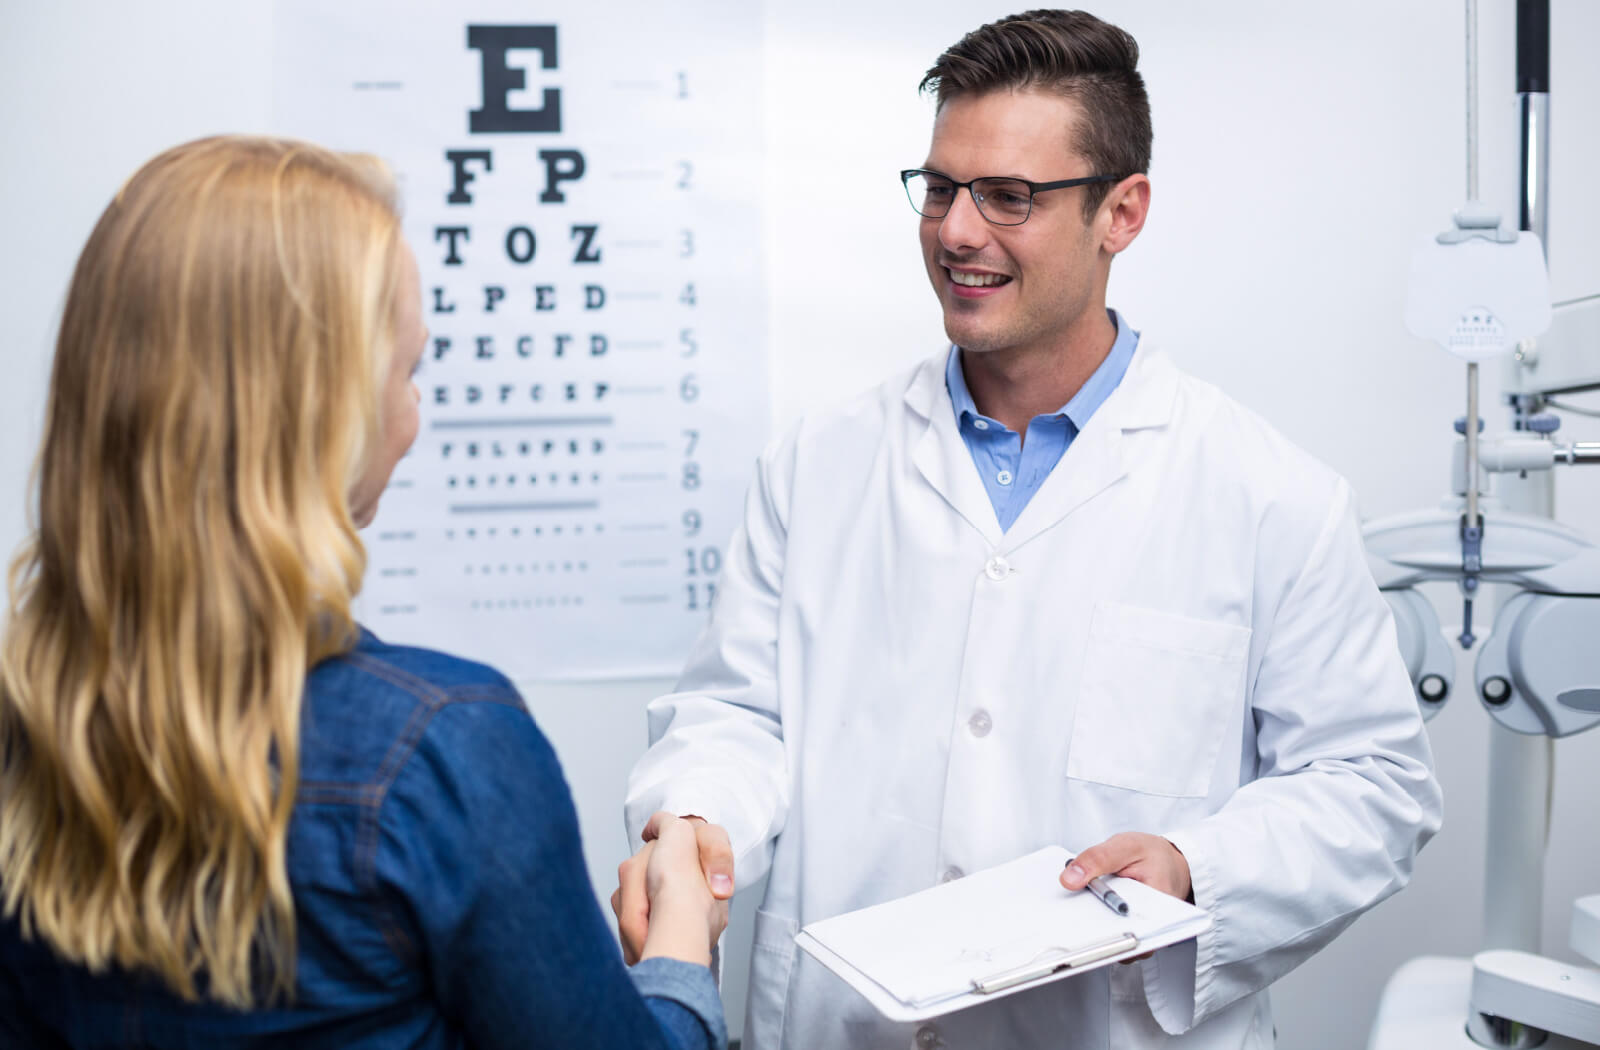 An optometrist shaking hands with his patient in an optometry office.